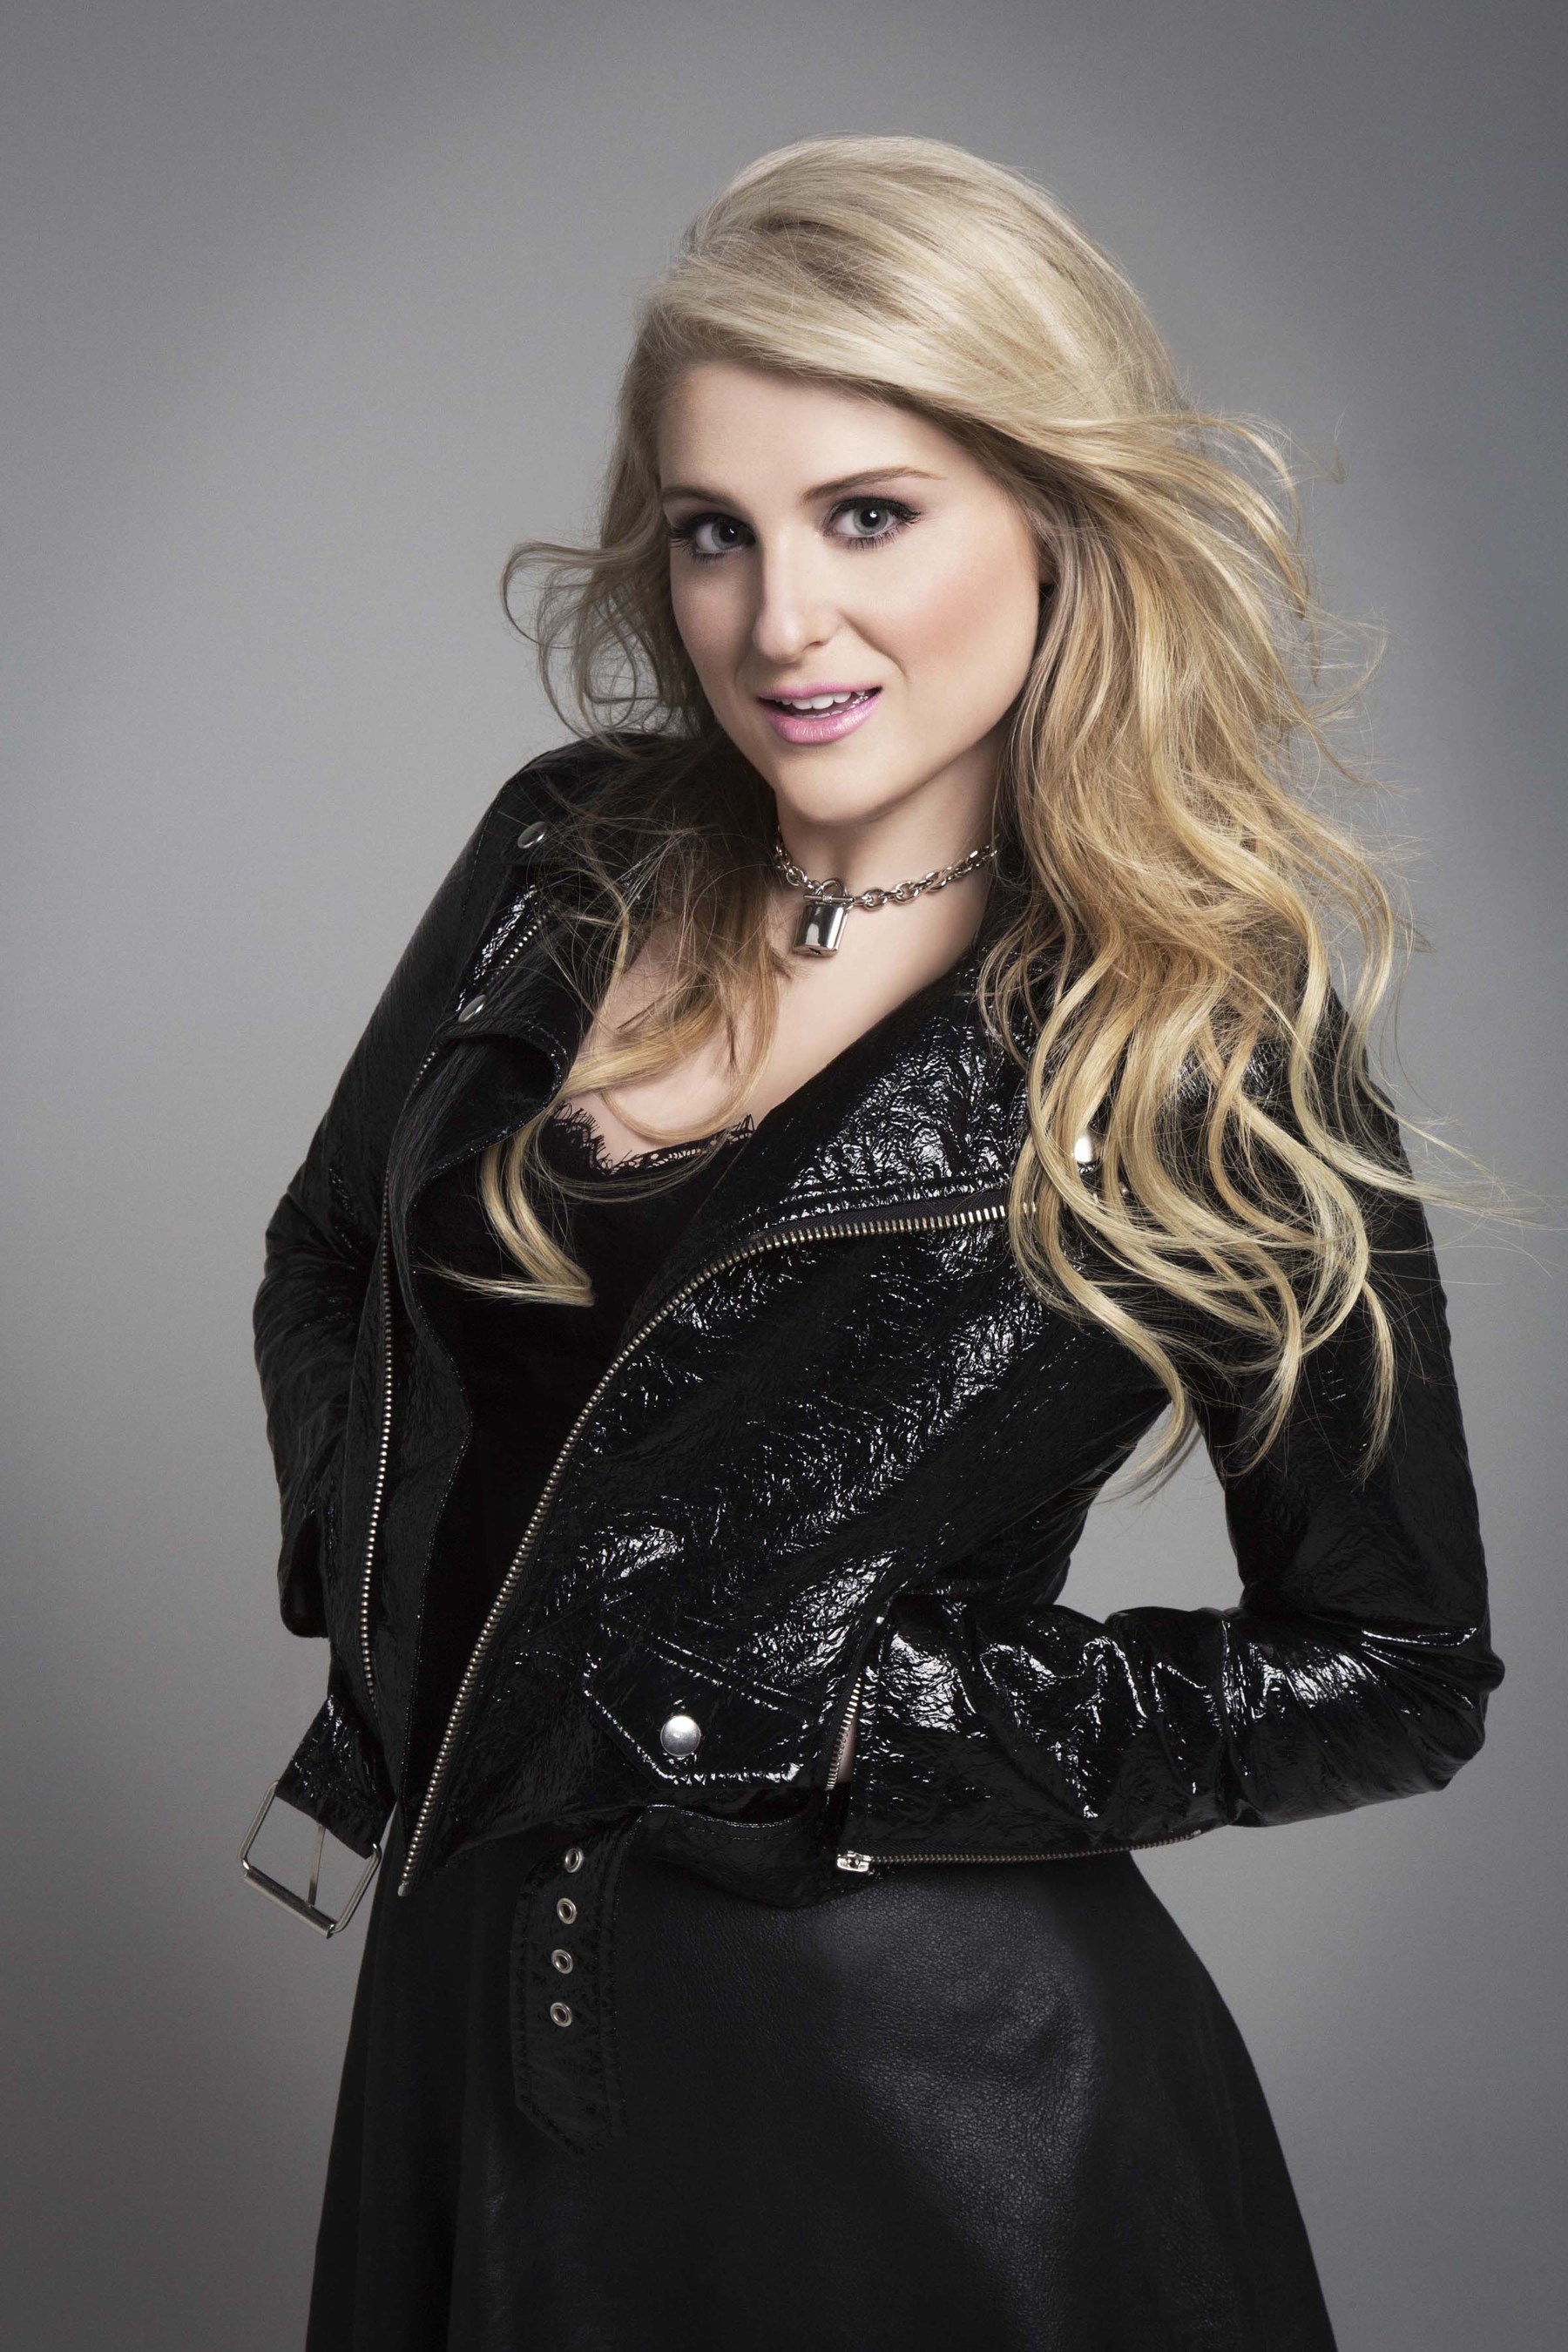 Epic Records Partners With HP for Breakout Pop Star Meghan Trainor's New "Lips Are Movin" Video and HP's #BendTheRules Campaign